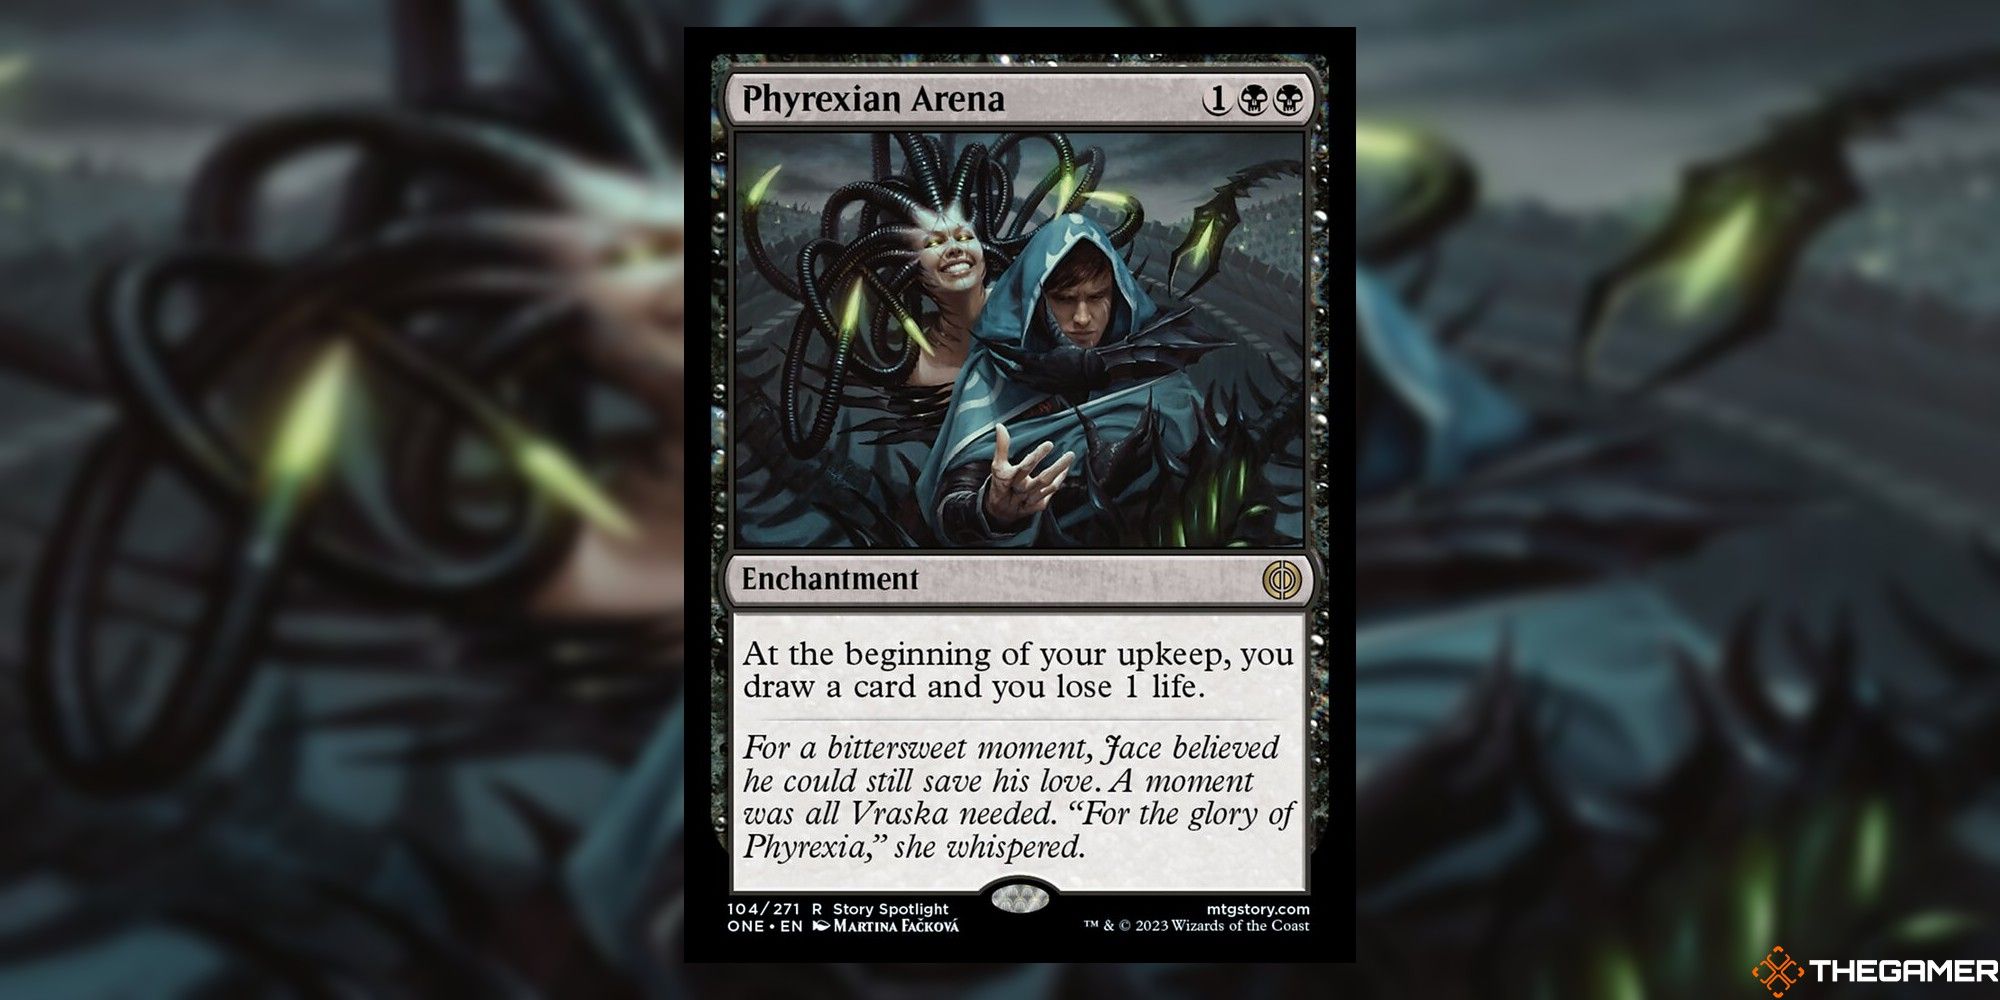 Phyrexian Arena card and art background